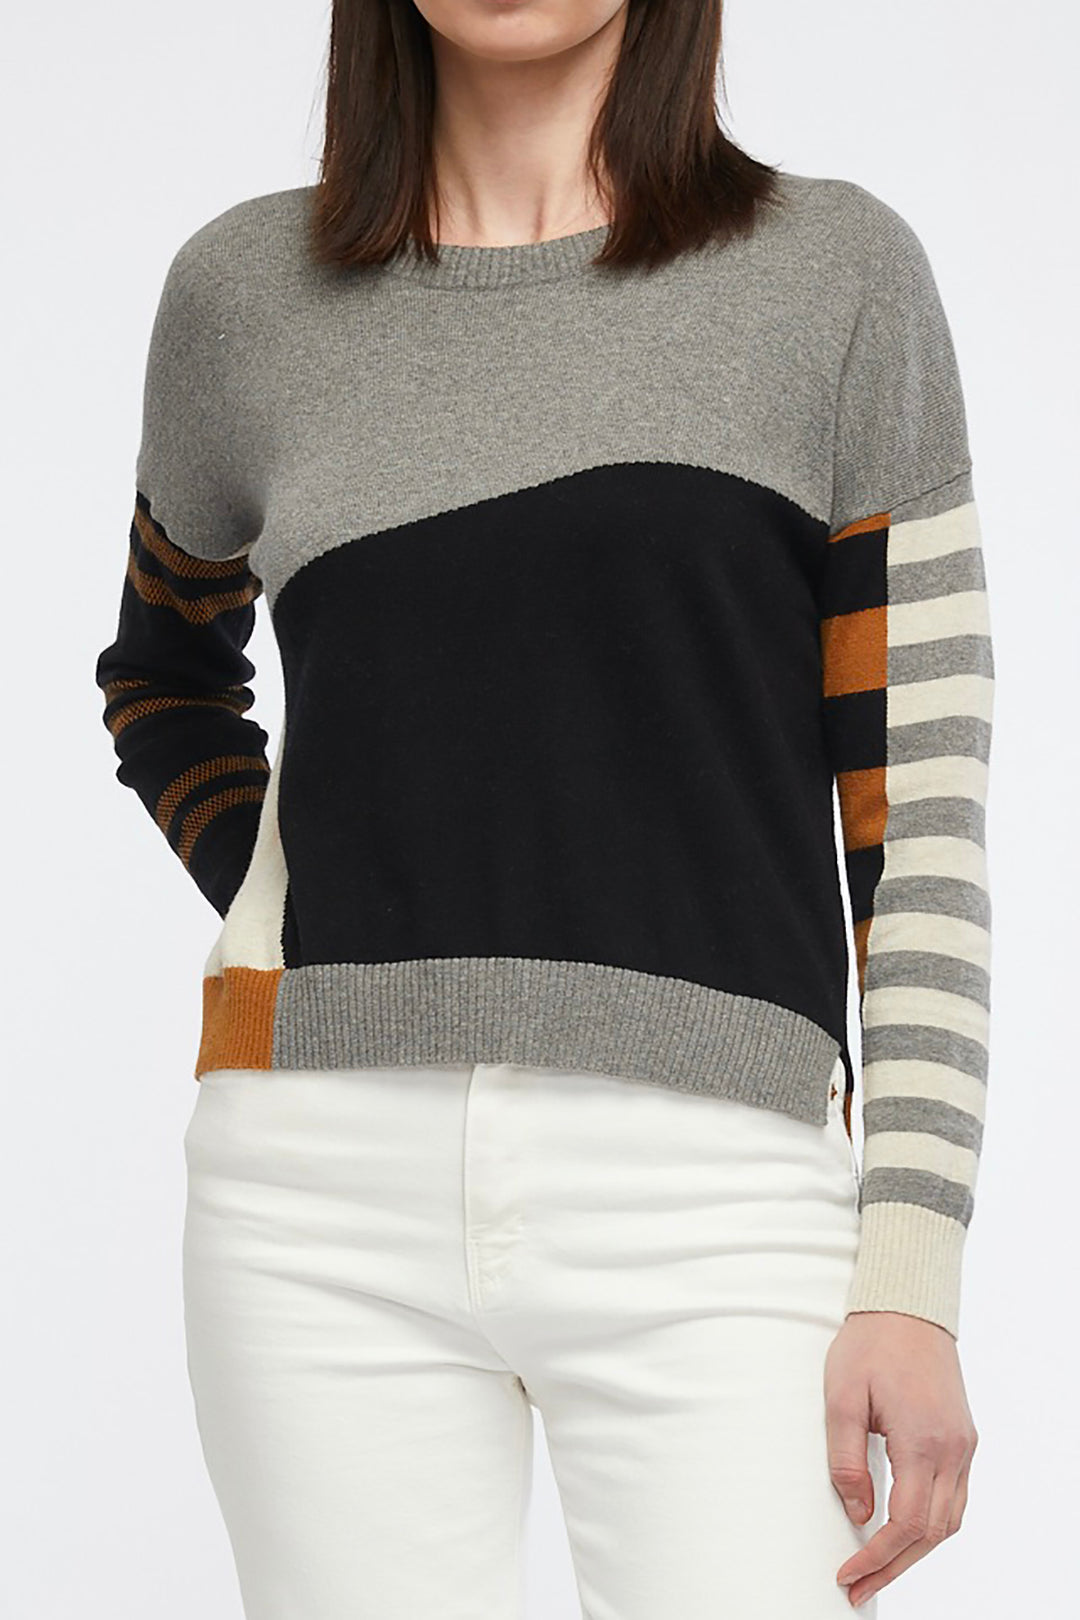 Eclectic Intarsia Jumper in cloud by Zacket & Plover